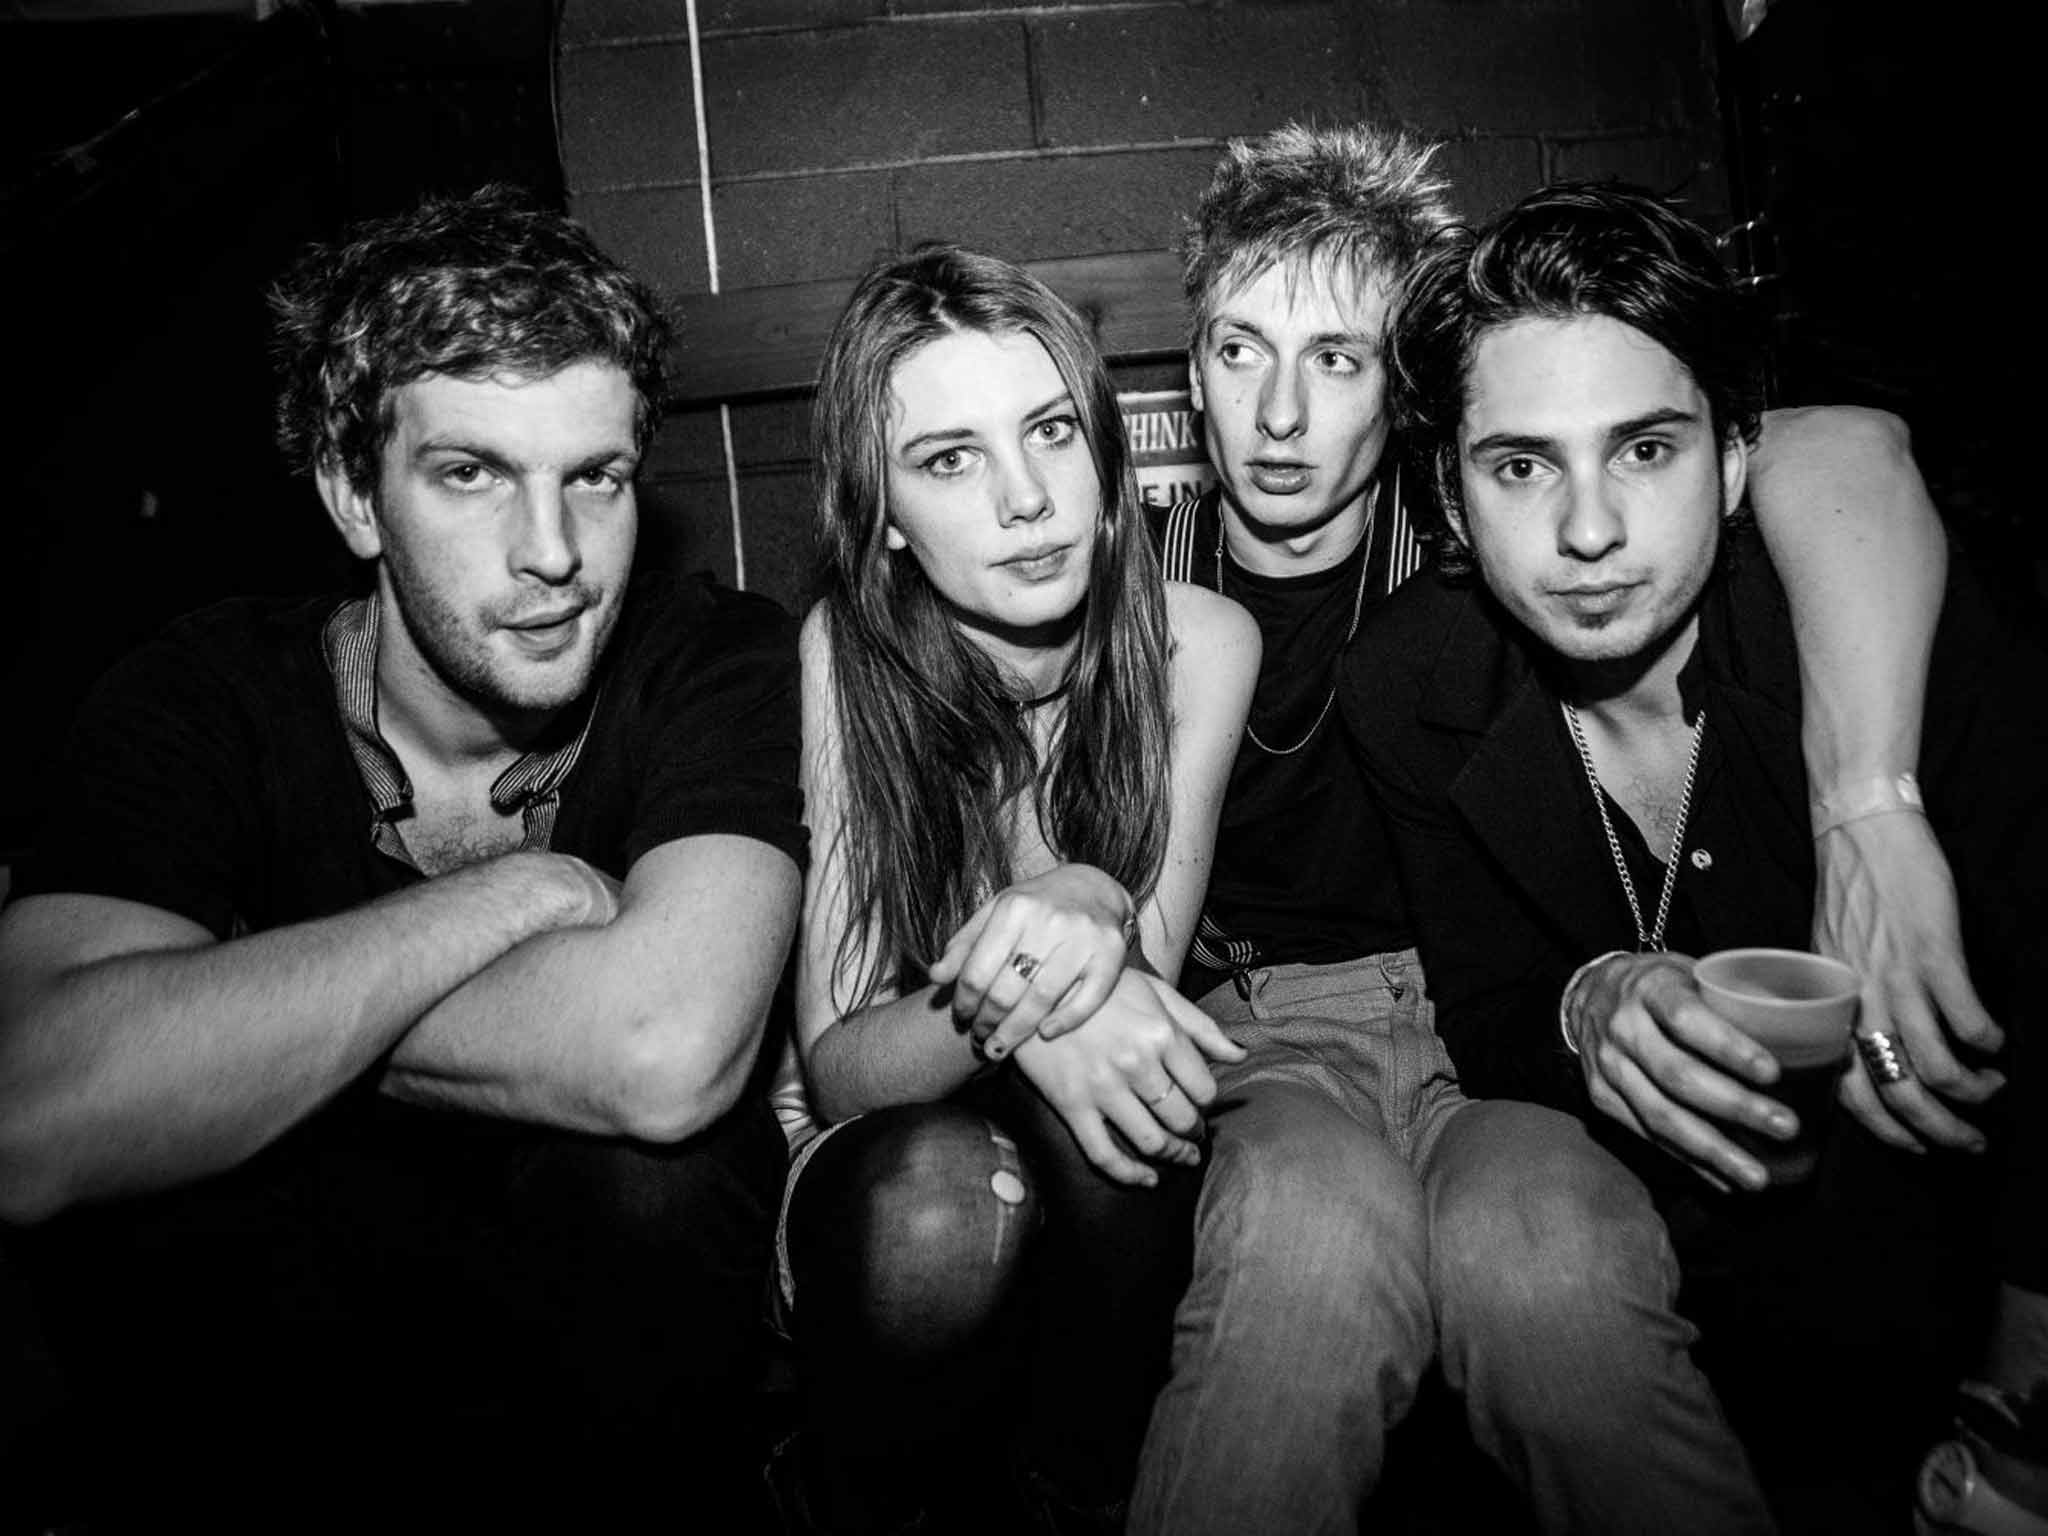 Wolf Alice, who are on the longlist for the BBC's Sound of 2015, played the John Peel stage last year and will be performing on the Park stage on Friday from 5pm